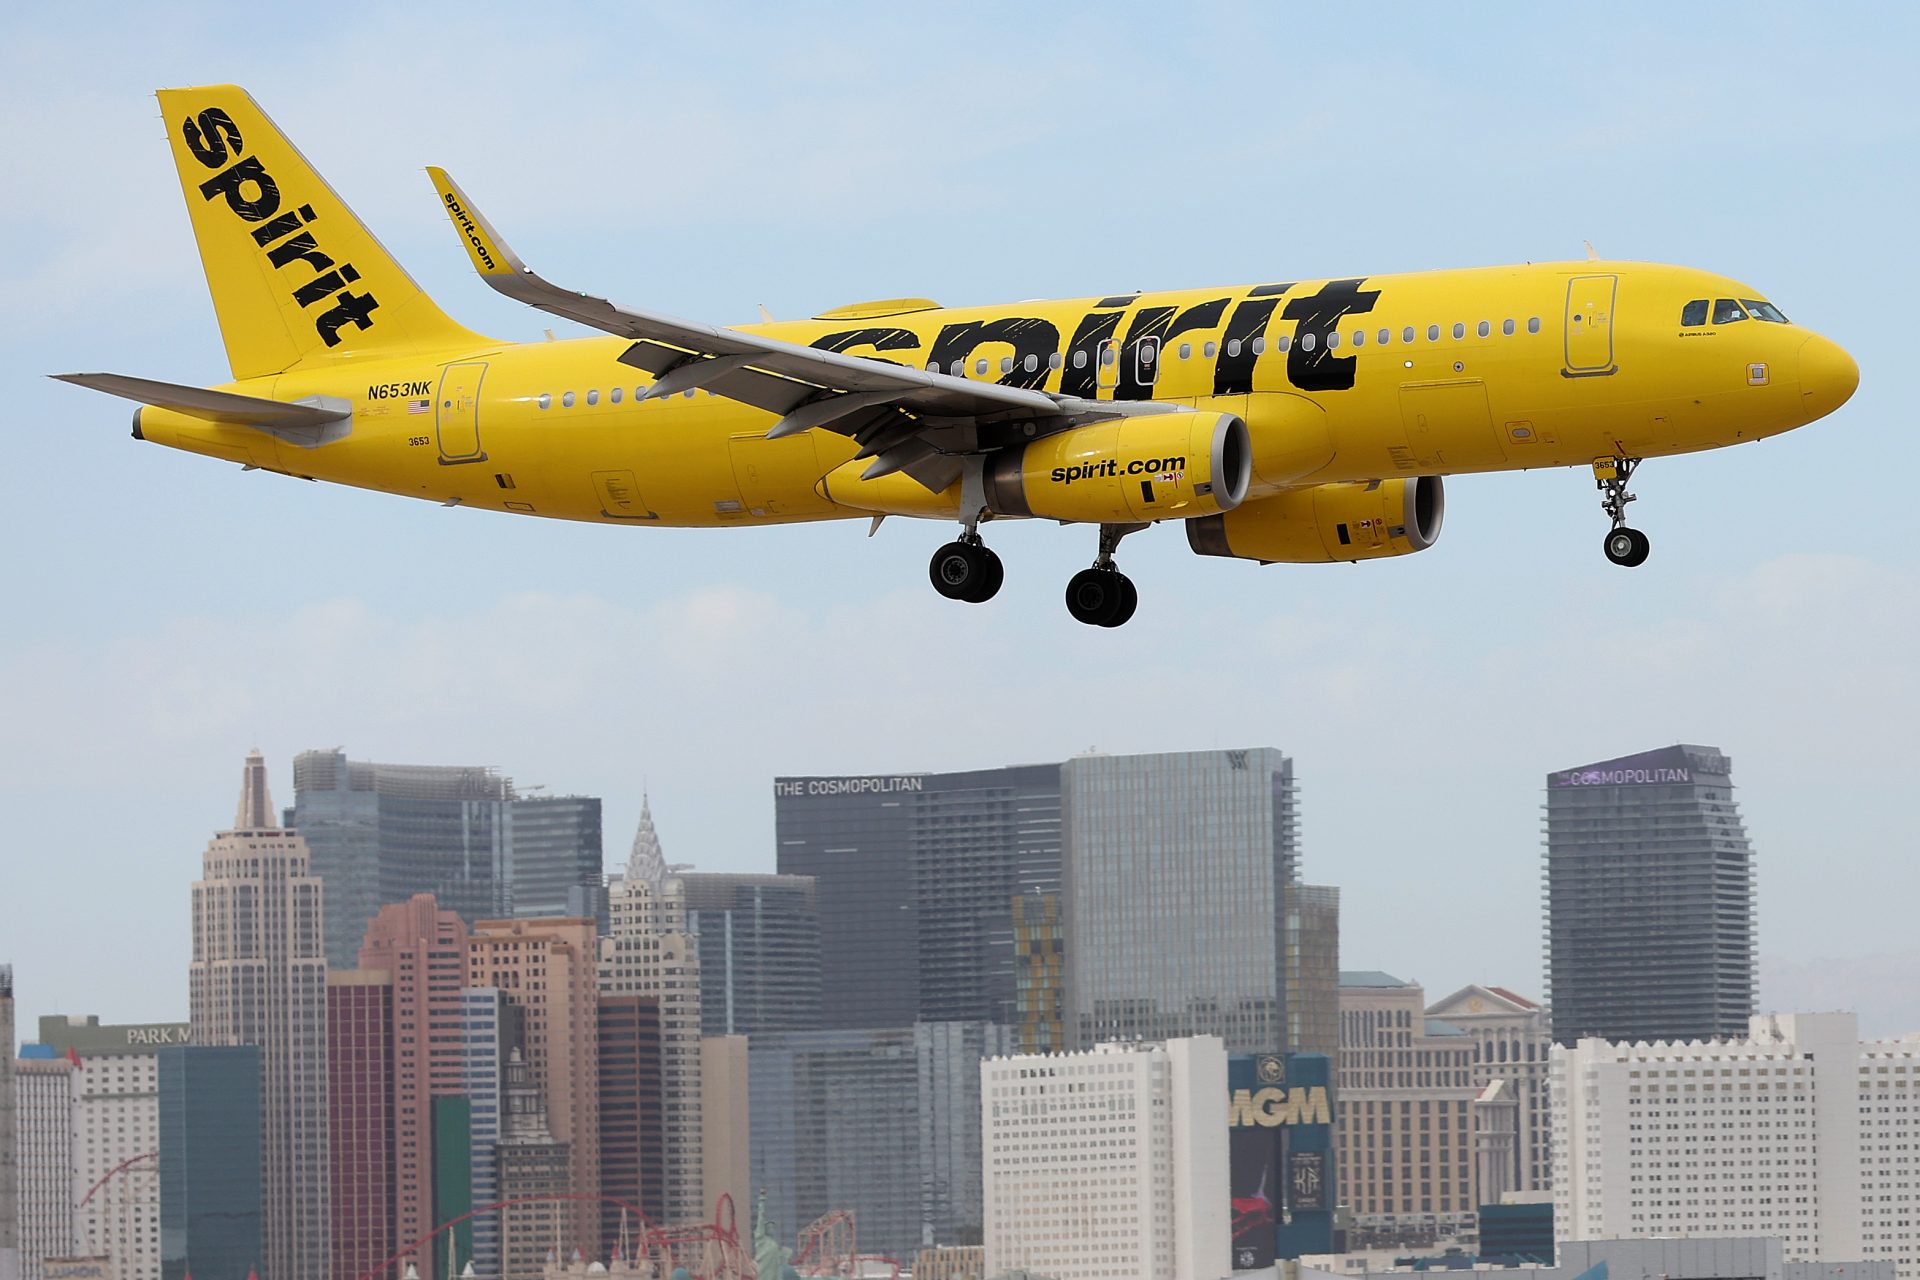 <p><span>Spirit came in a close second to Delta with a final score of 66.57. You wouldn’t think America’s low-cost carrier would fare so well but the budget airline's rock-bottom prices are what propelled it to the number two spot. </span></p>